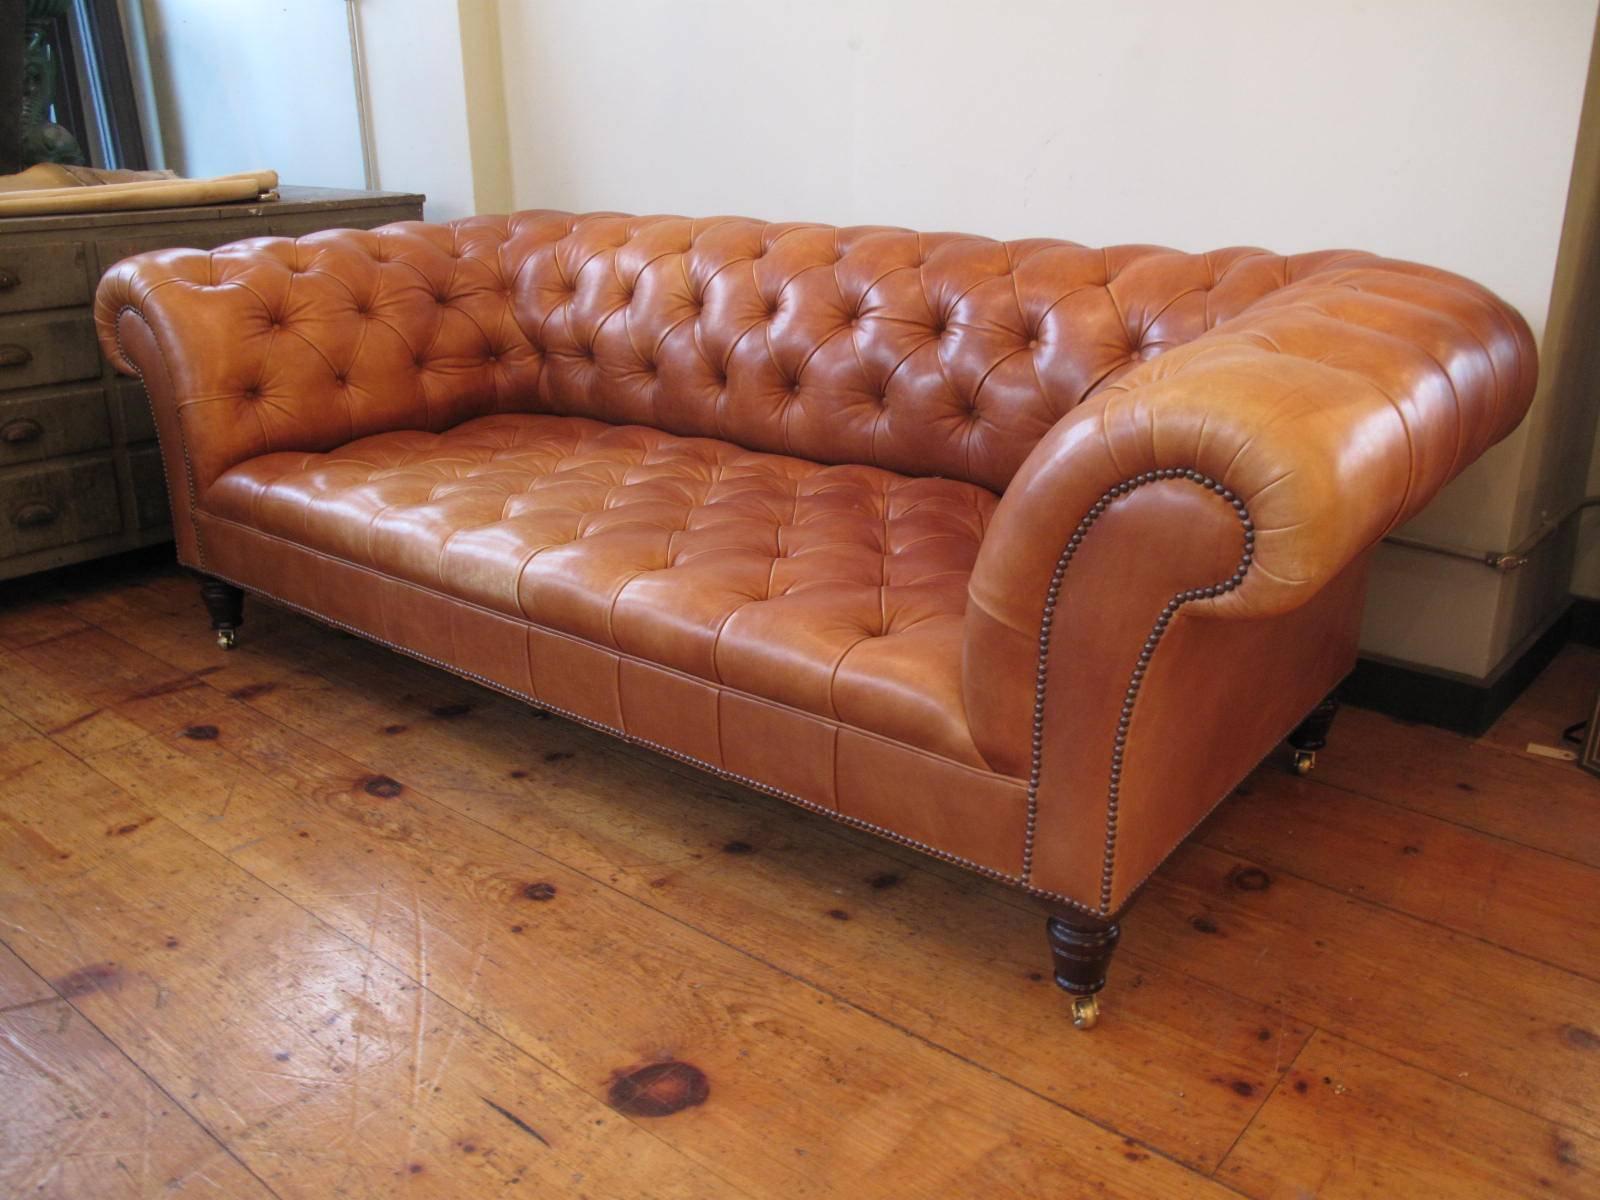 Tufted leather Chesterfield style sofa. By English fine furniture maker George Smith.